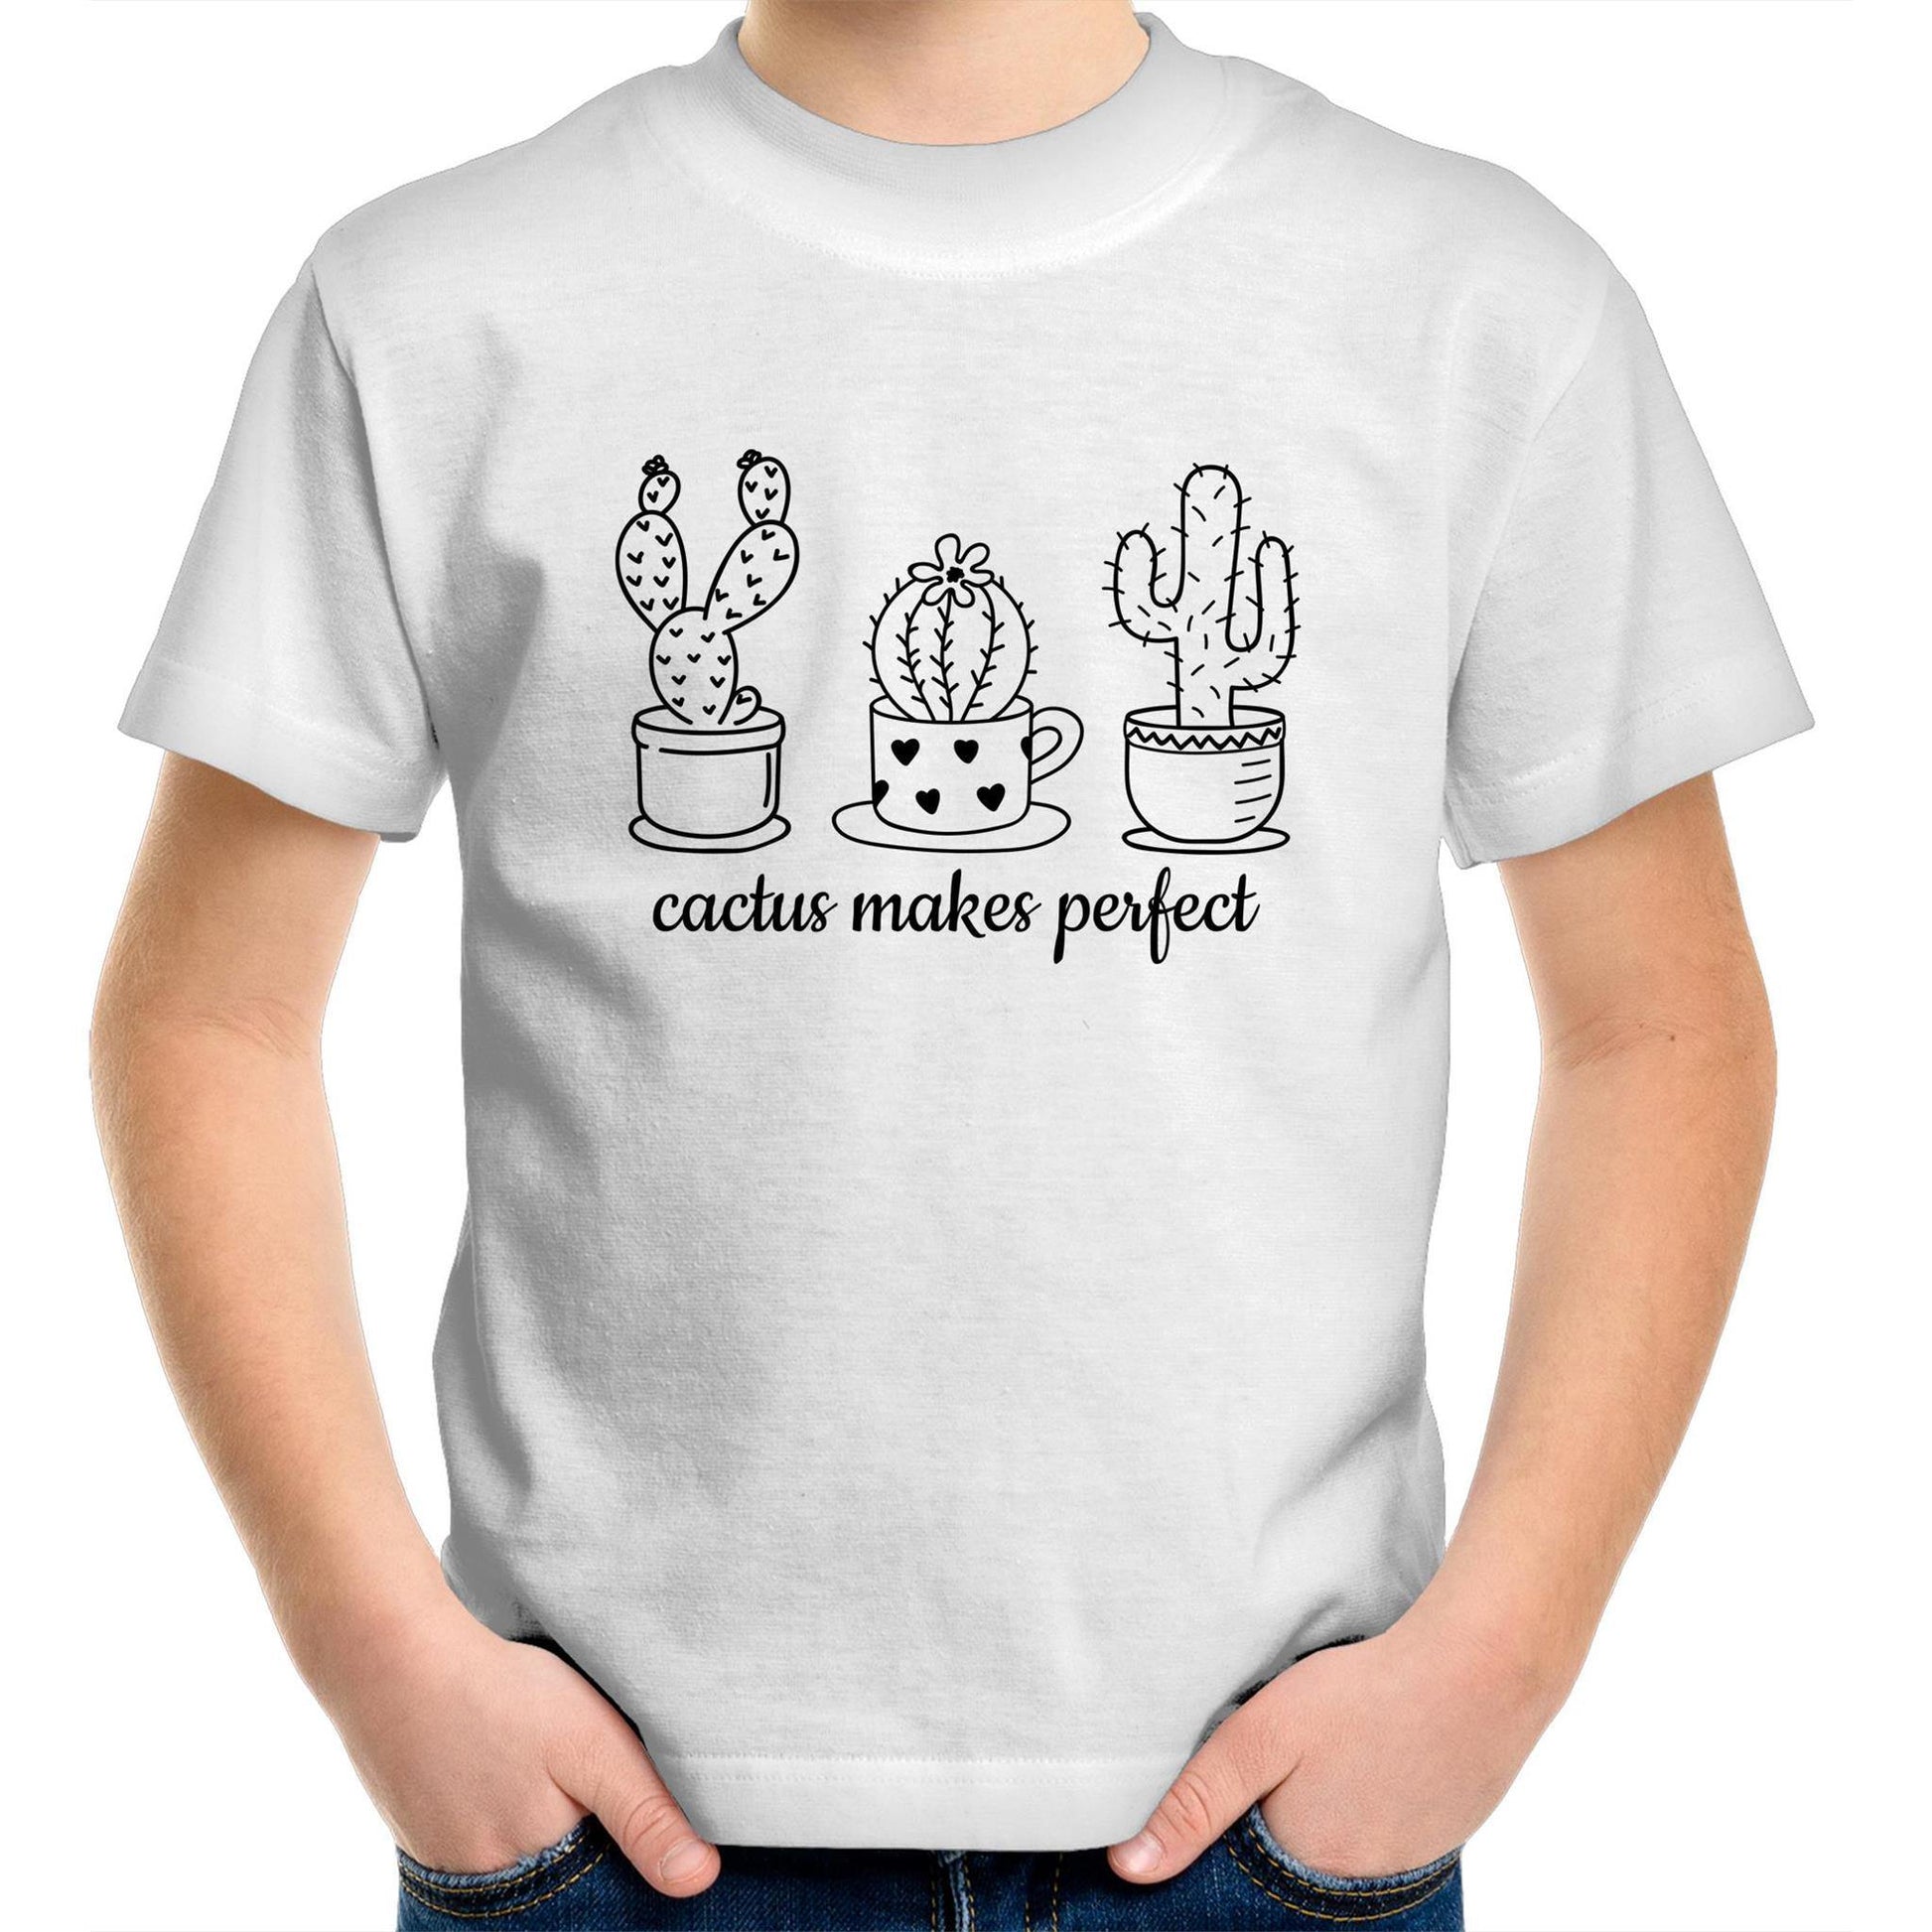 Cactus Makes Perfect - Kids Youth Crew T-Shirt White Kids Youth T-shirt Plants